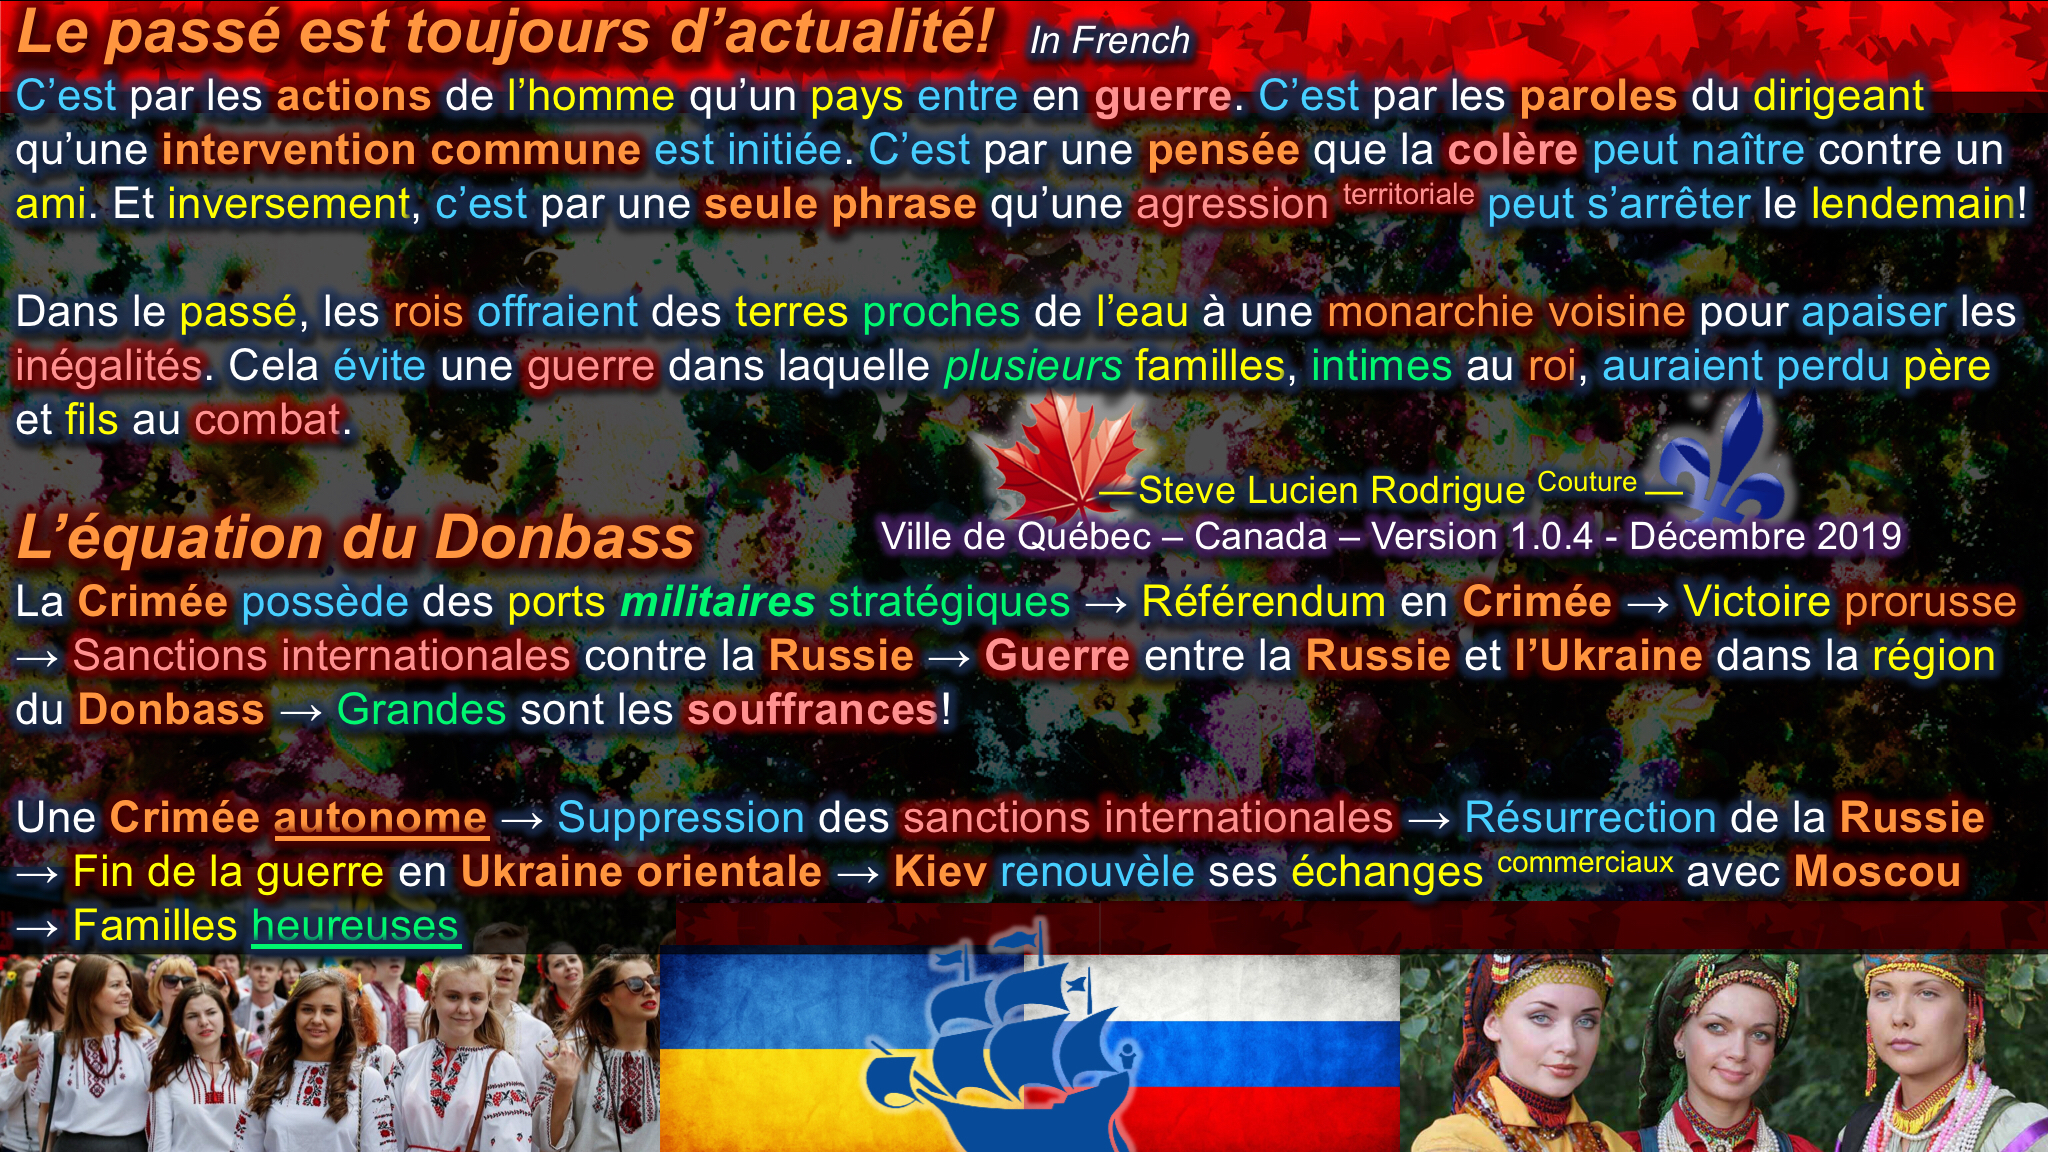 The Donbass Equation in French